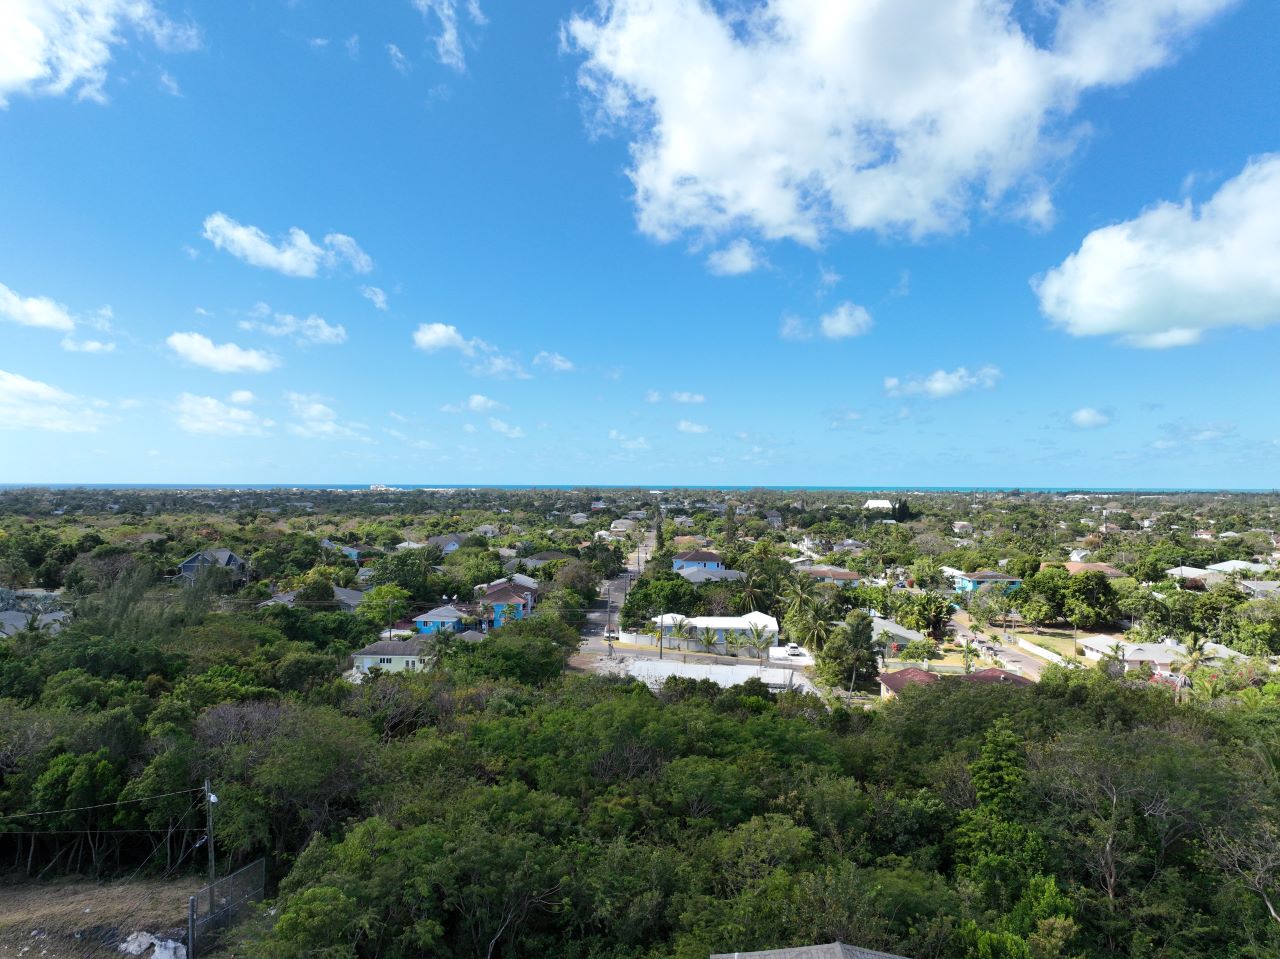 Residential lot for sale in Nassau Bahamas